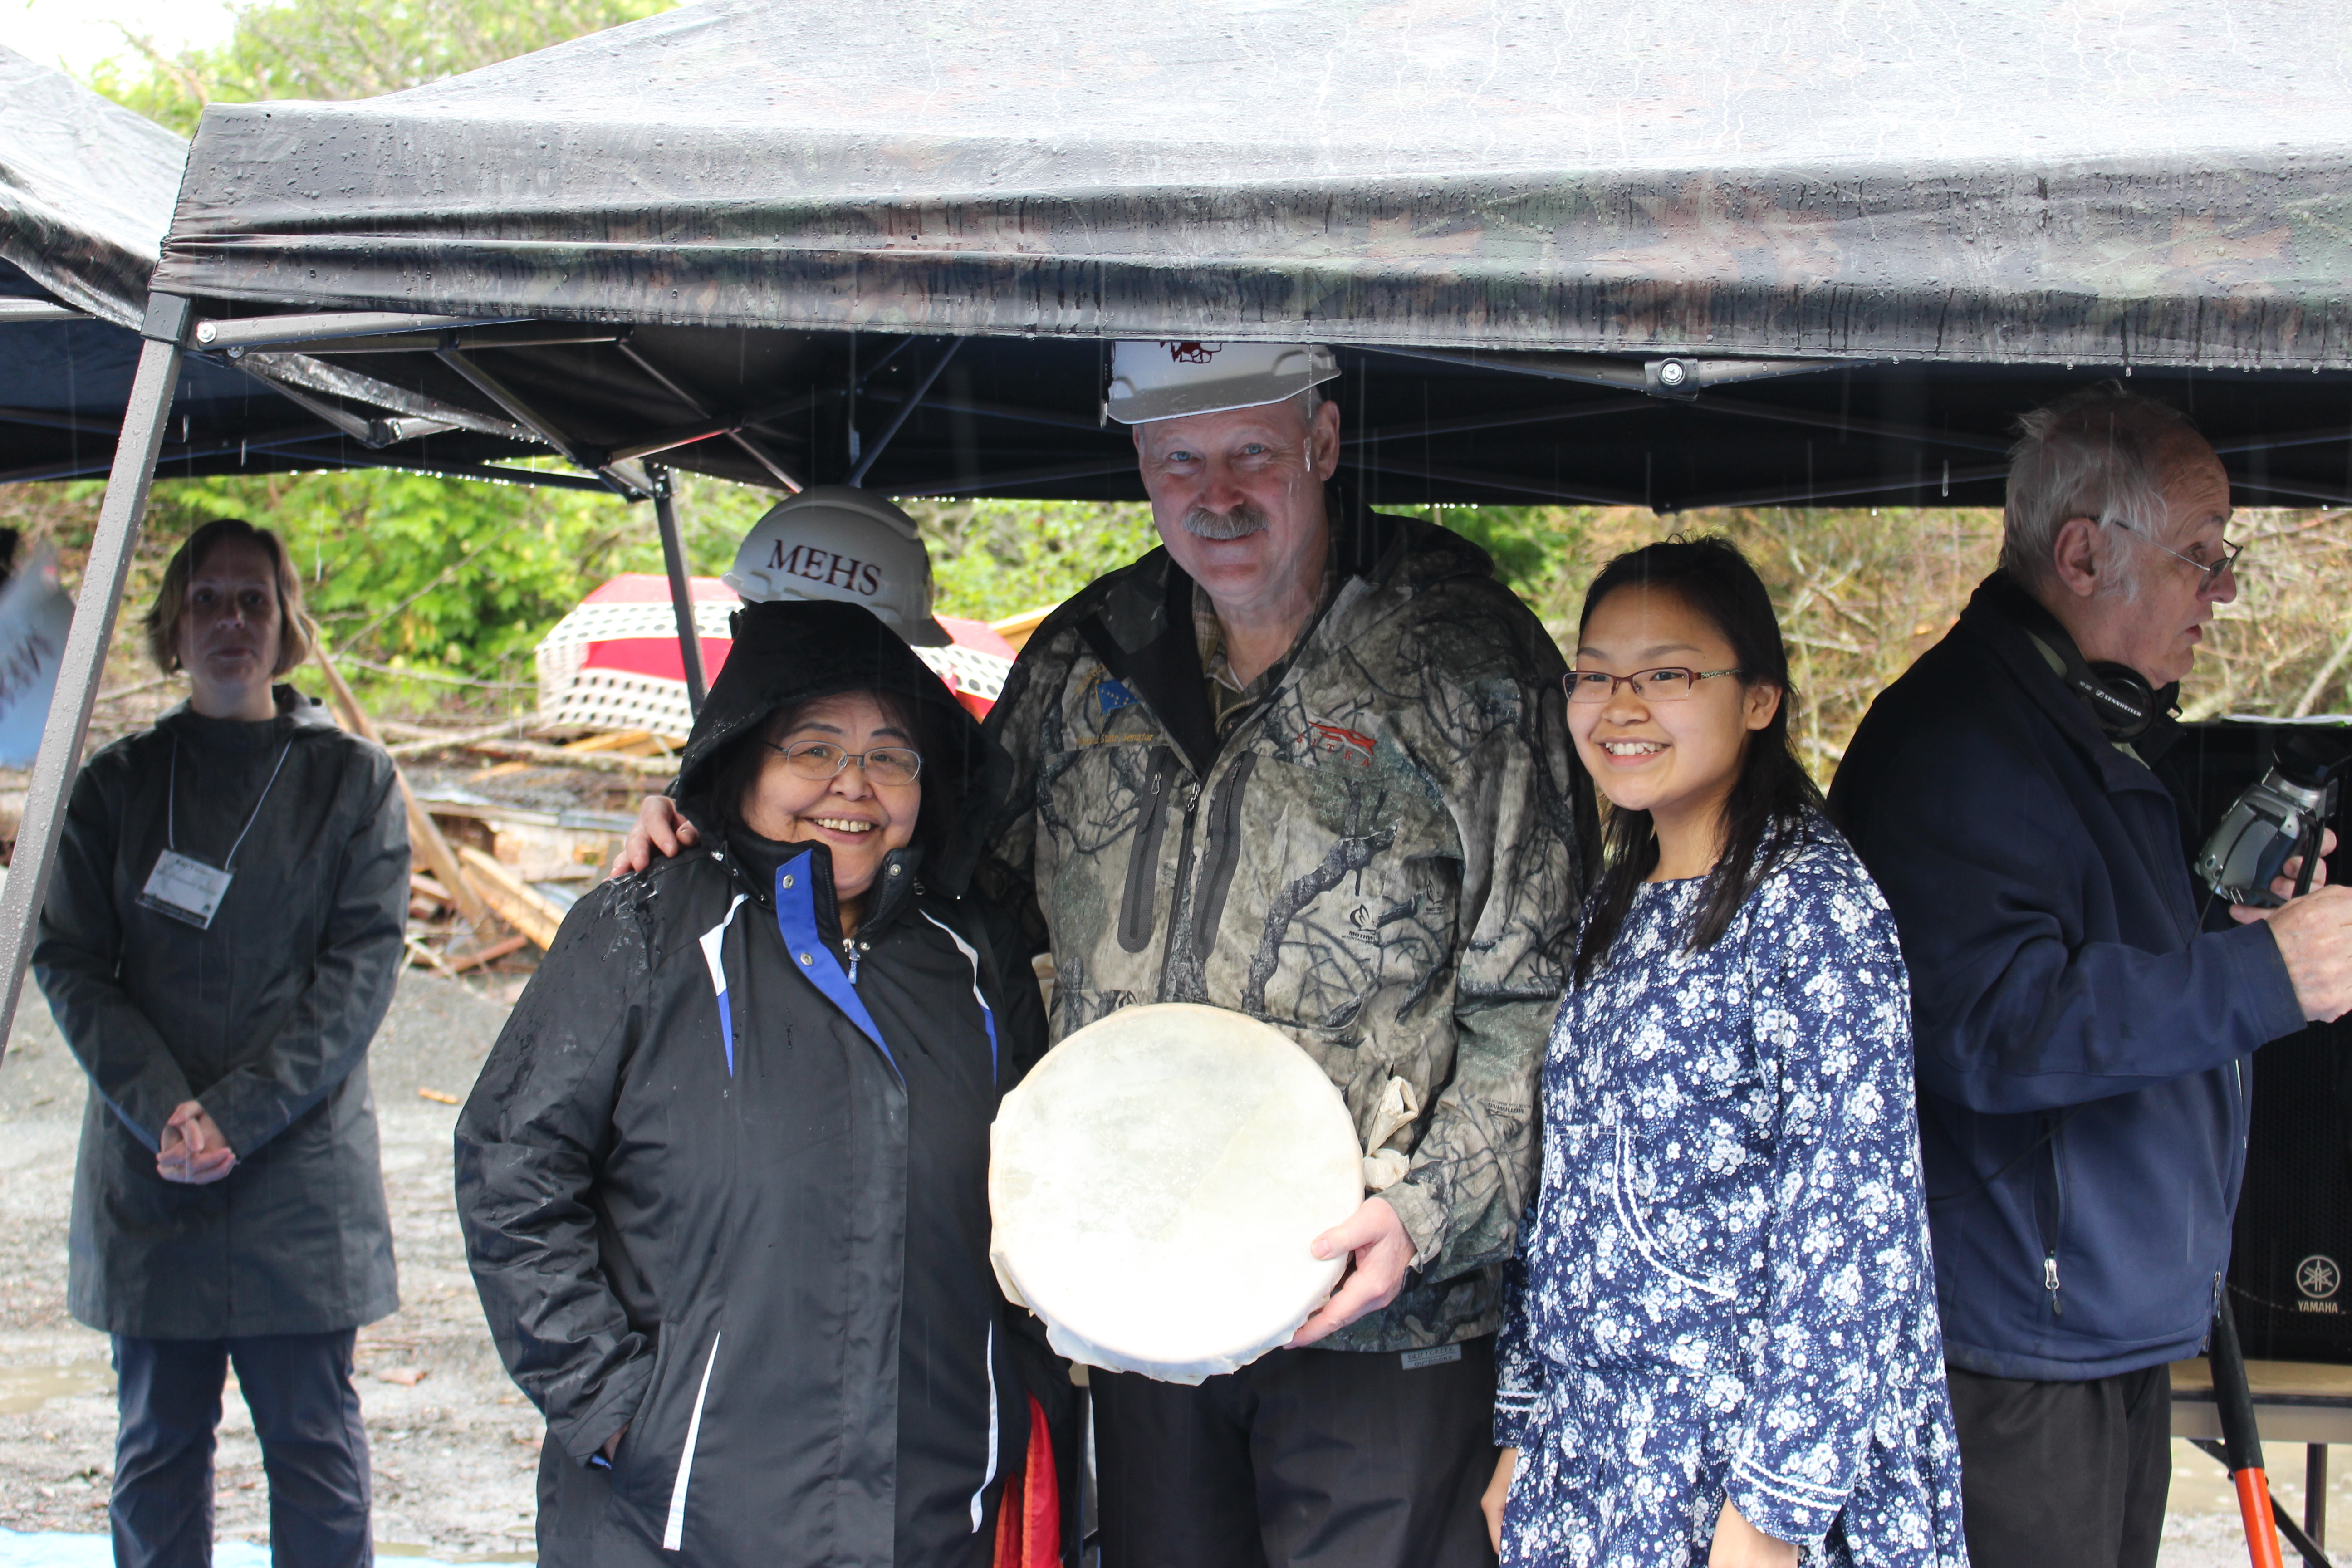 Senator Stedman pictured here wtih Alaska Native Artist Sarah Williams and a MEHS student at the groundbreaking ceremony for the MEHS Aquatic Facility.